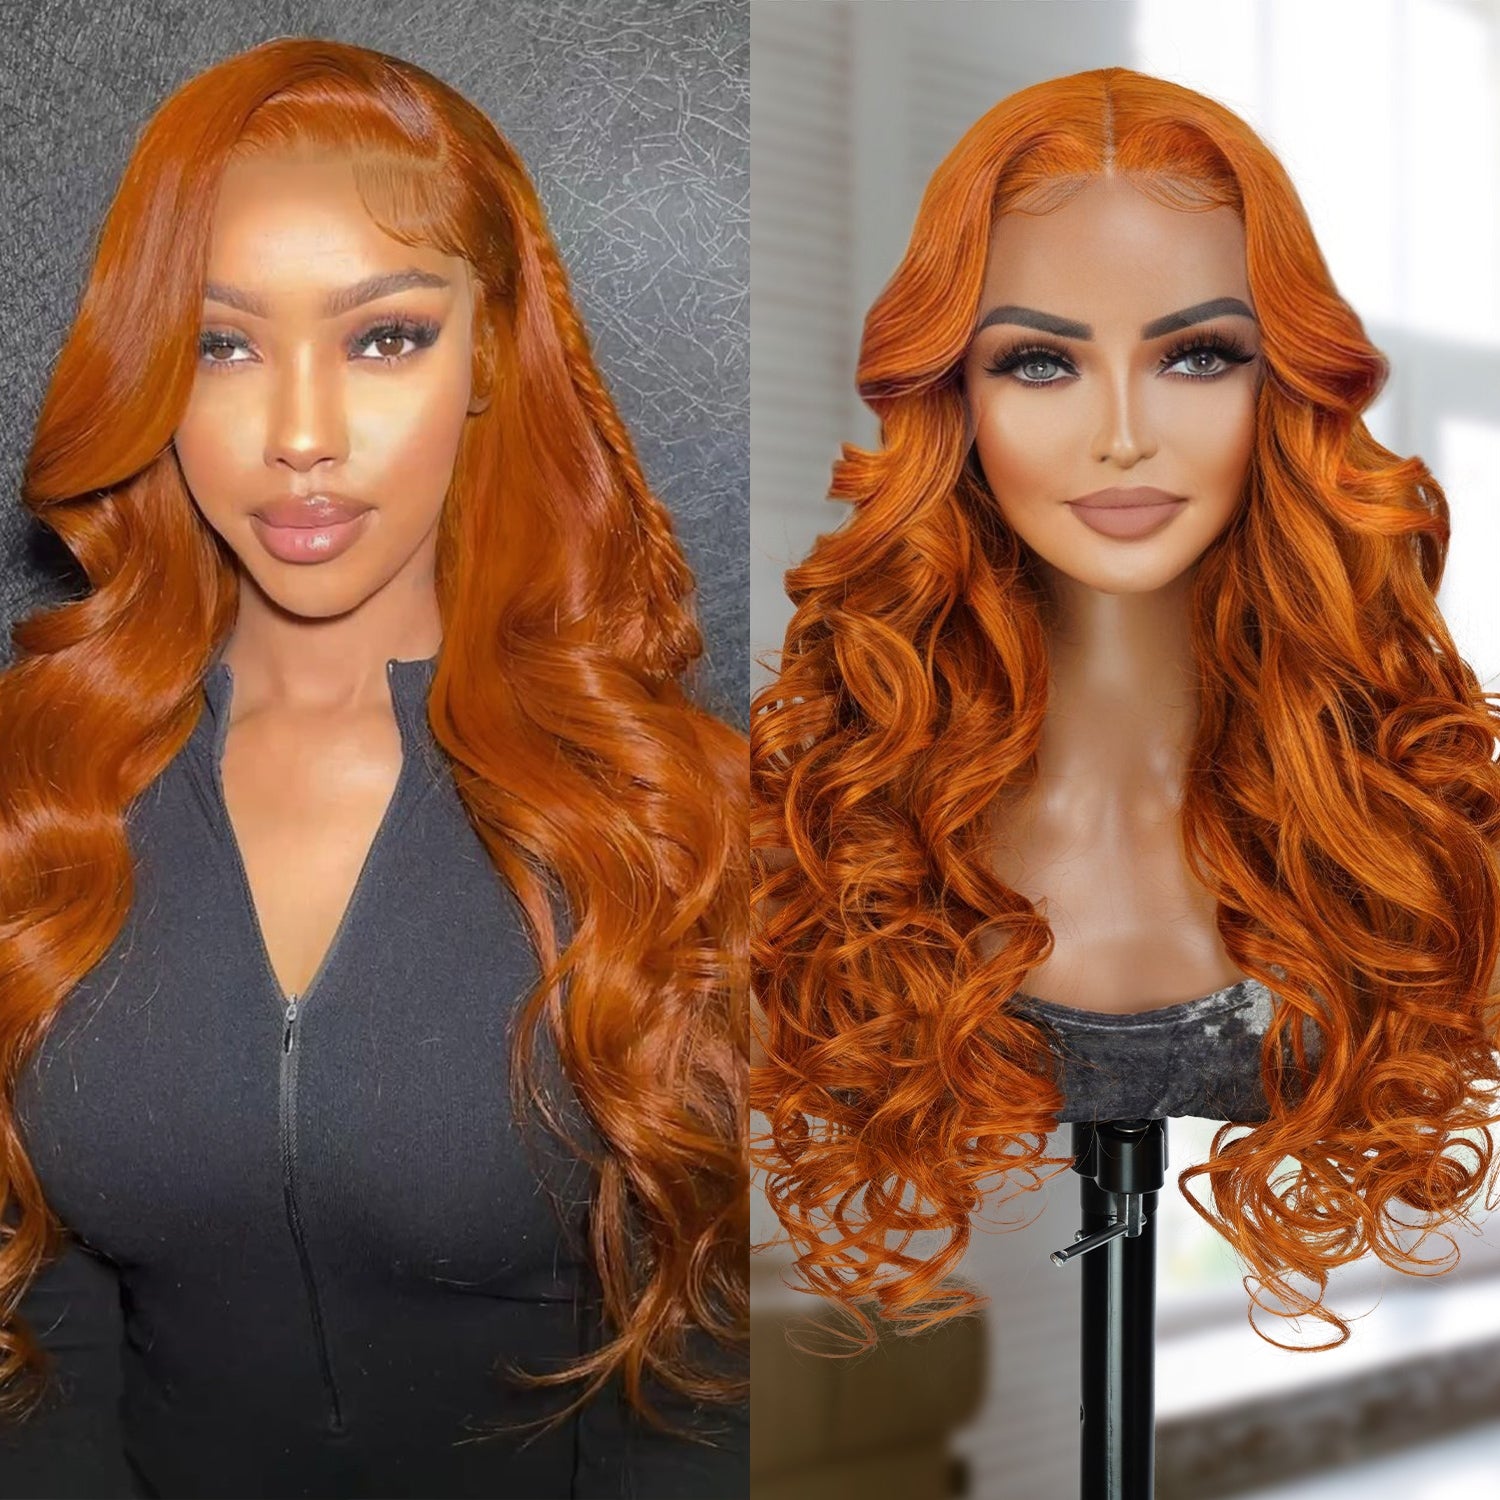 Good quality t-part human hair wigs, Pre-plucked with baby hair and natural look, Middle part wig of easy and comfortable to wear, Reasonable price for fancy colored wigs, Ginger orange color gives you a trendy look, Prevent hair damage with this Pre-Bleached & dyed wig by experts